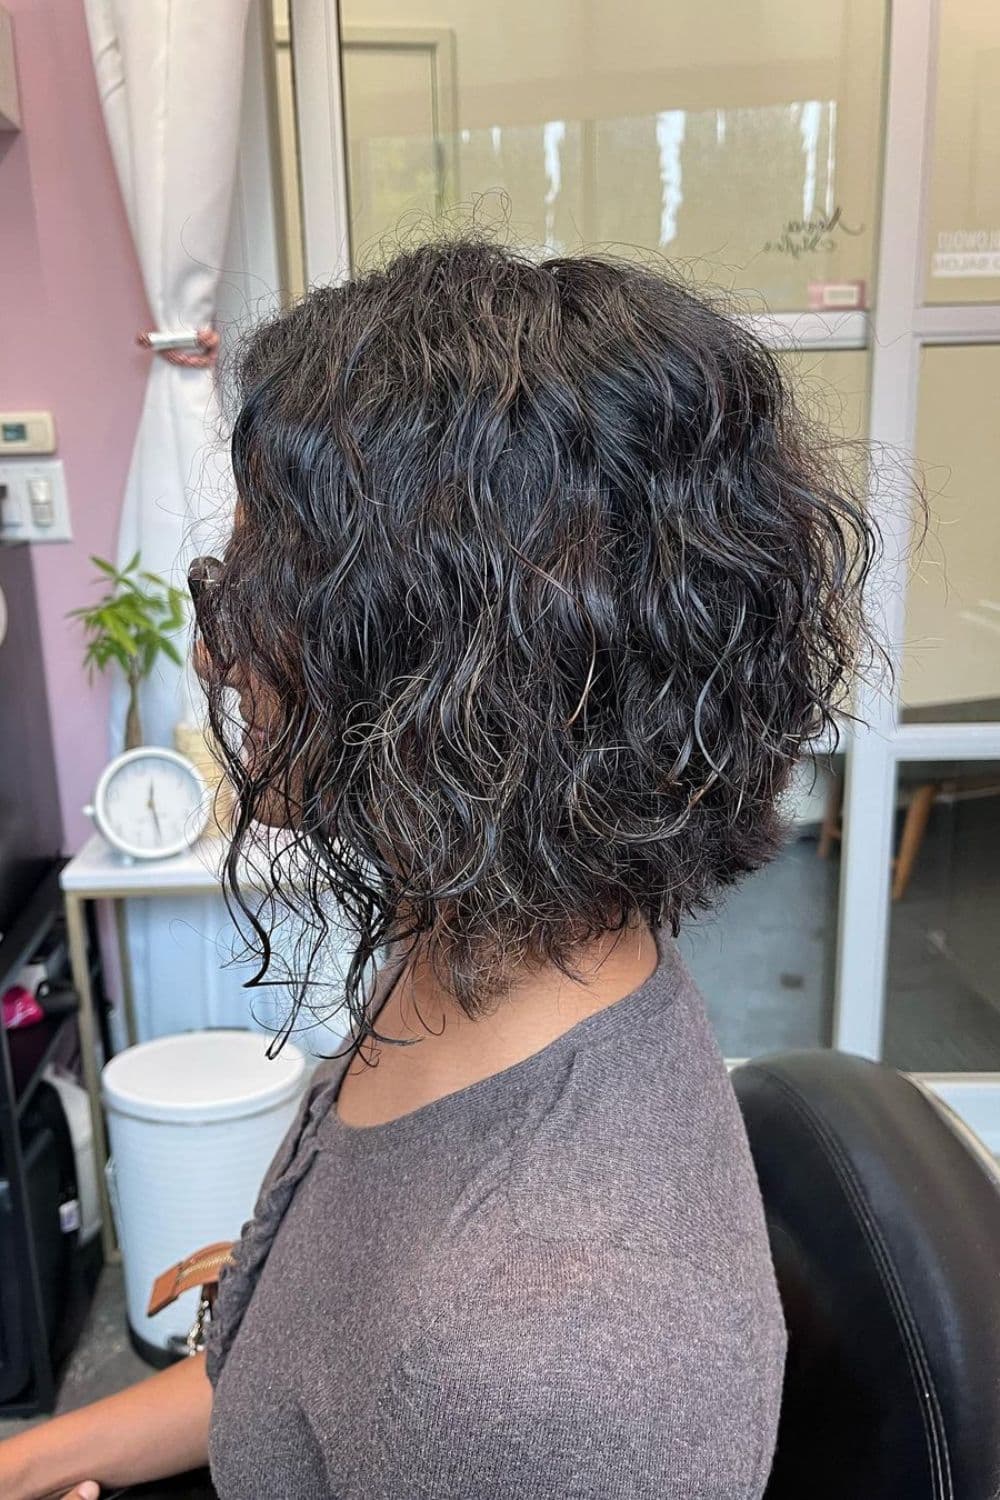 An old woman with a gray curly A-line cut with choppy layers.